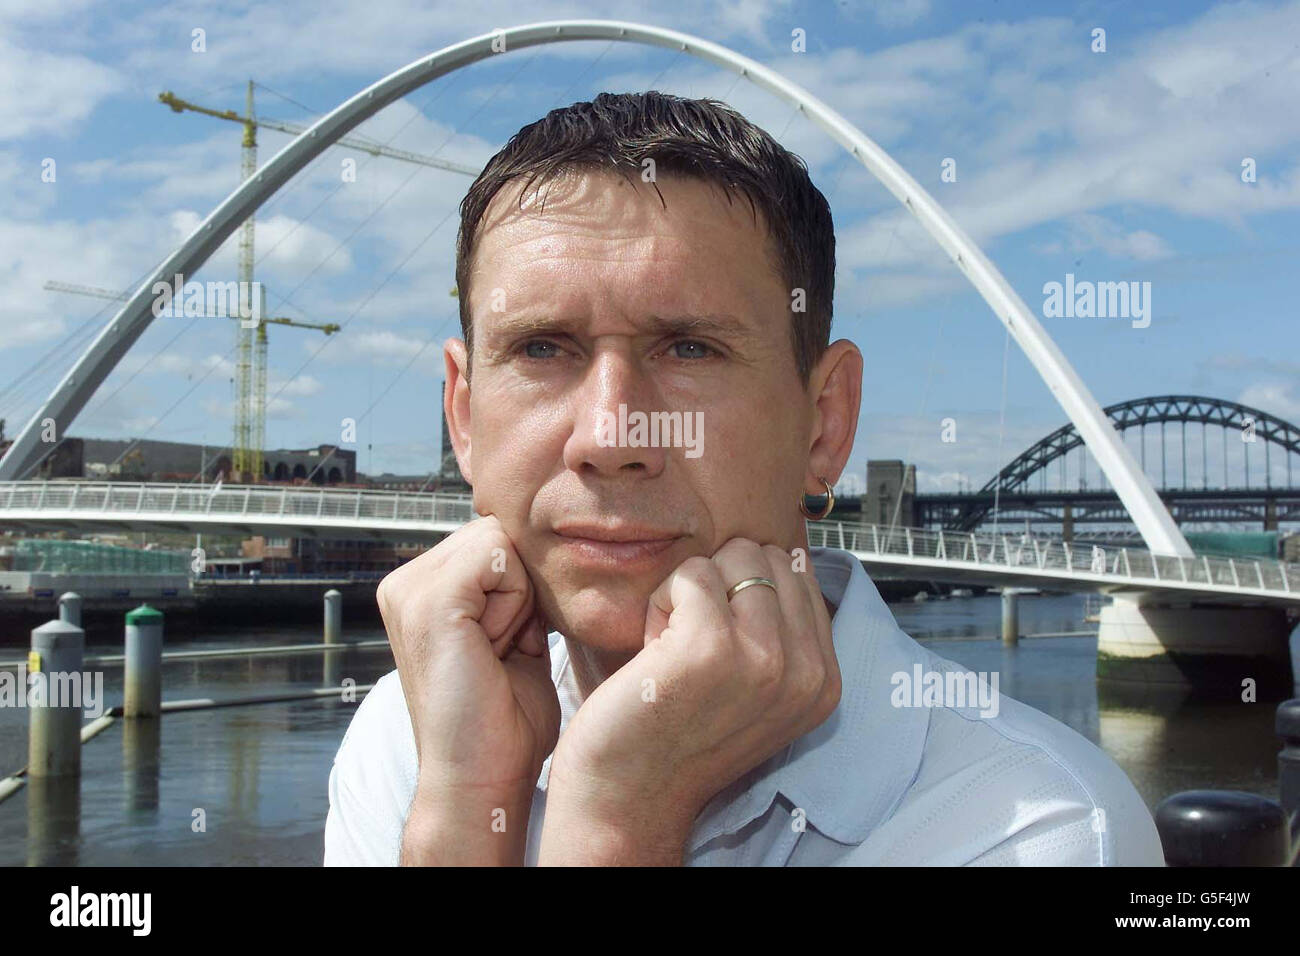 Kevin Alderson, 40, of from County Durham, on Newcastle Quayside, who is claiming constructive dismissal against Walkers Crisps for being a victim of disablity discrimination when he was allegedly picked on at a Walkers crisp factory were he worked because of a stutter. *... Mr Alderson worked for 23 years at the crisp factory in County Durham until May 2000 when he resigned after he felt complaints about the matter were not handled properly, claiming that the experiences turned him into a nervous wreck. He has been helped in bringing the case by the British Stammering Association and will Stock Photo